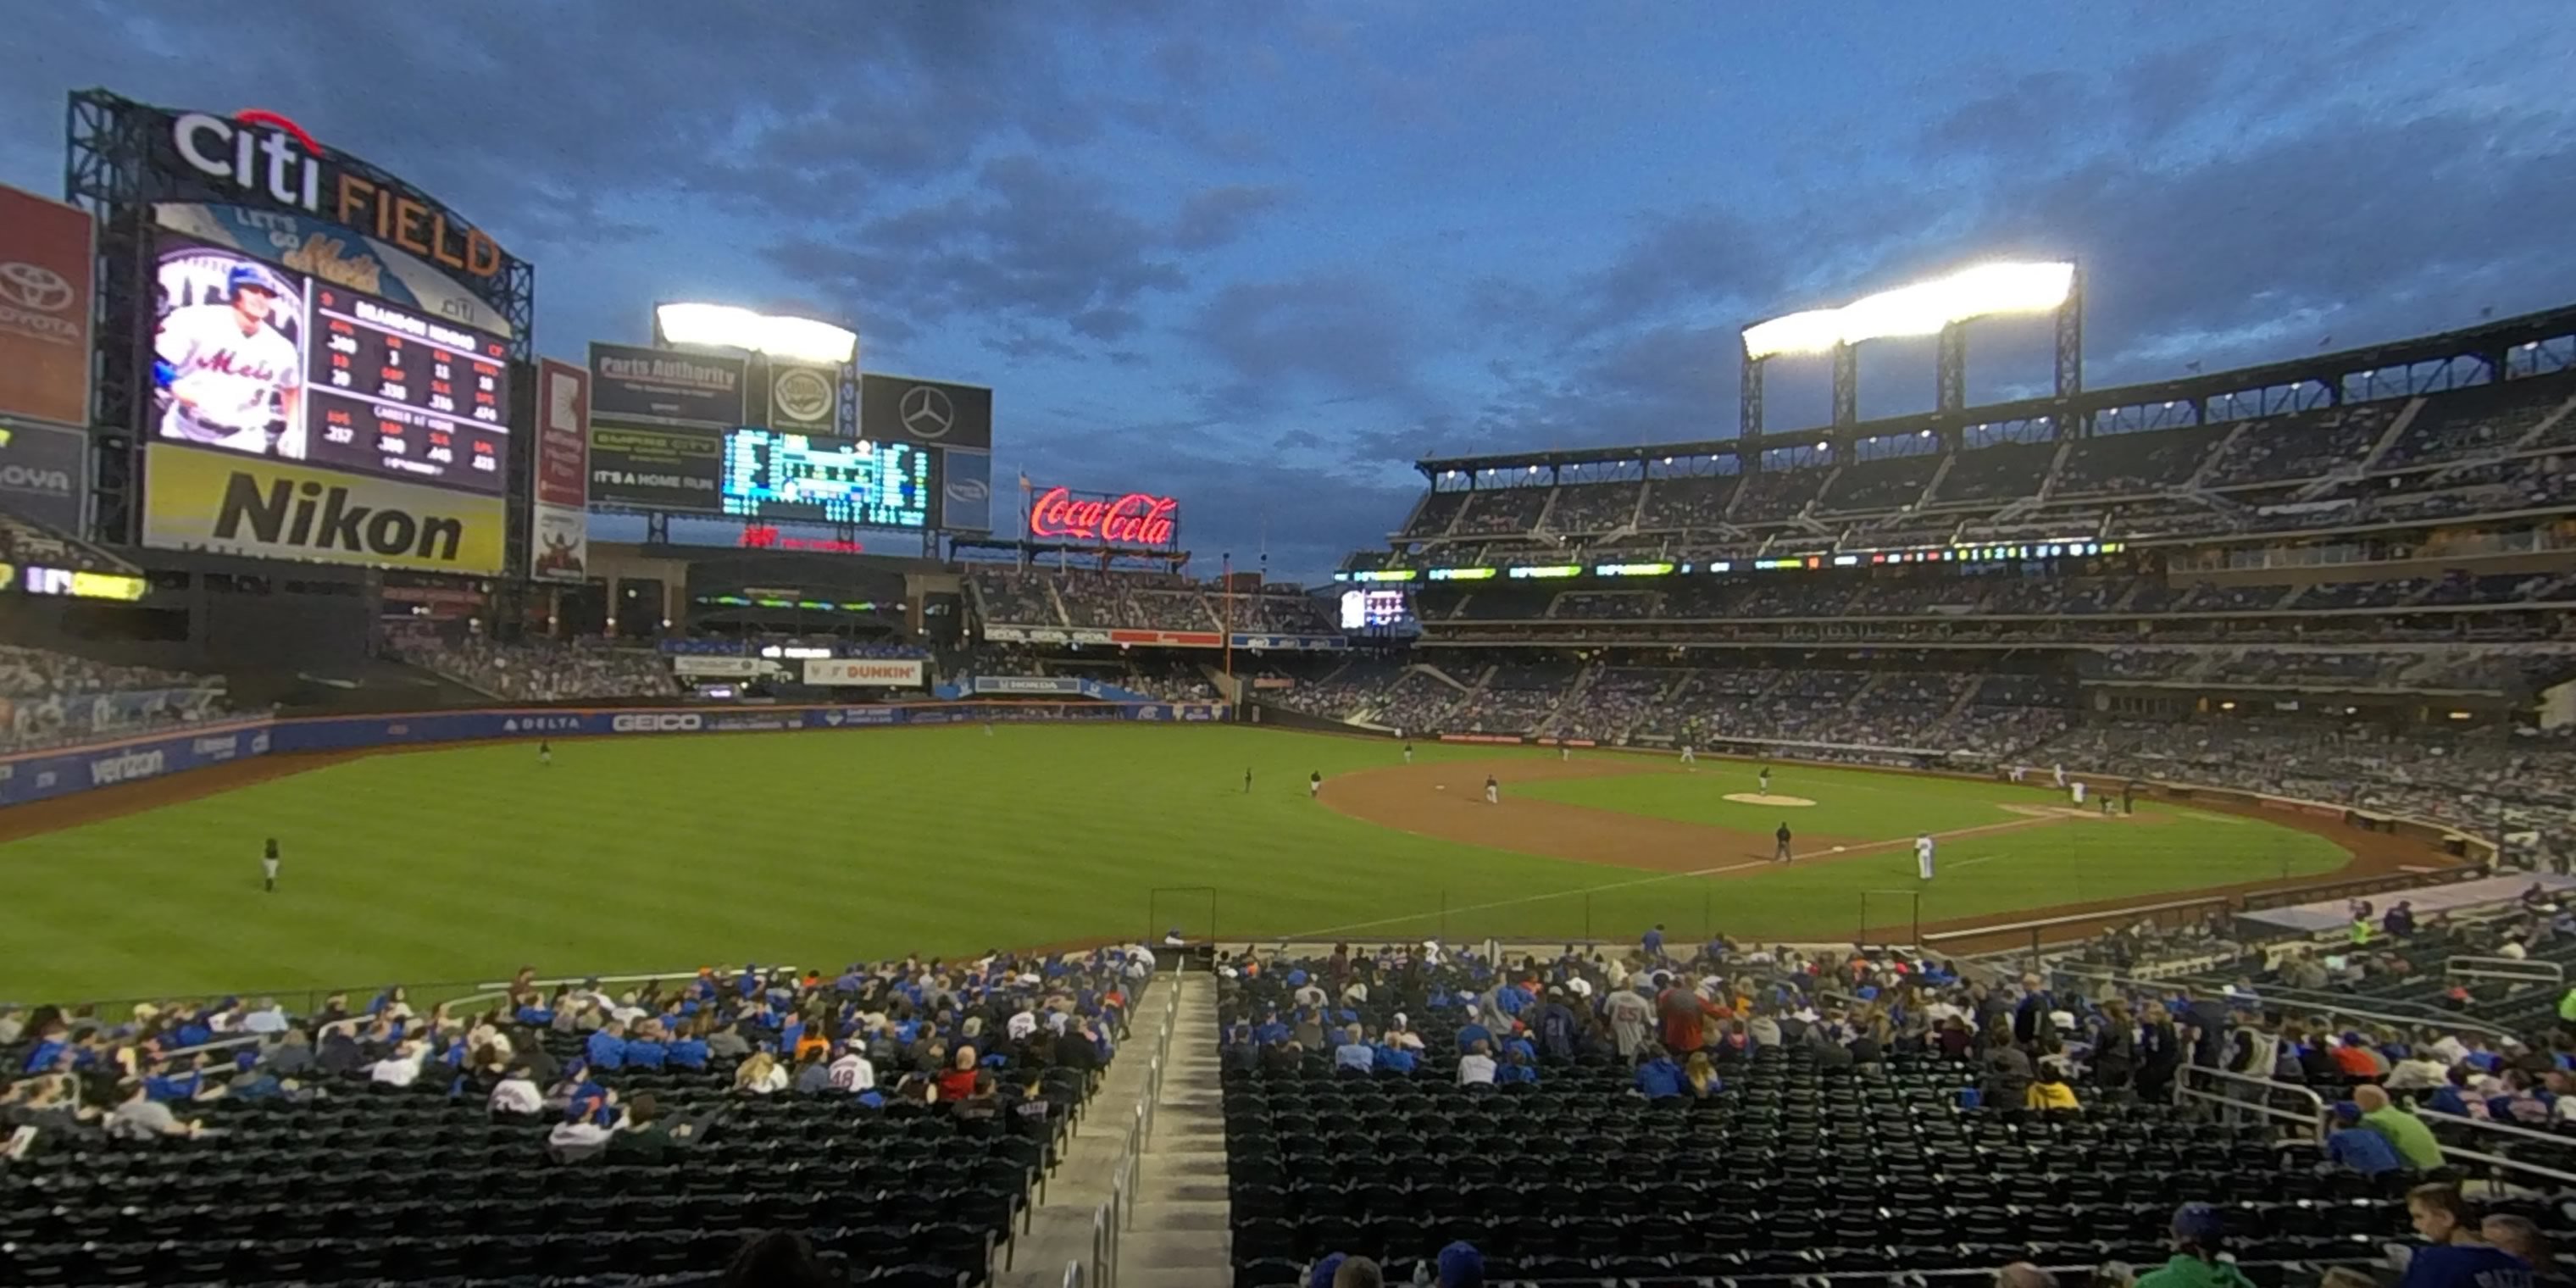 section 126 panoramic seat view  - citi field